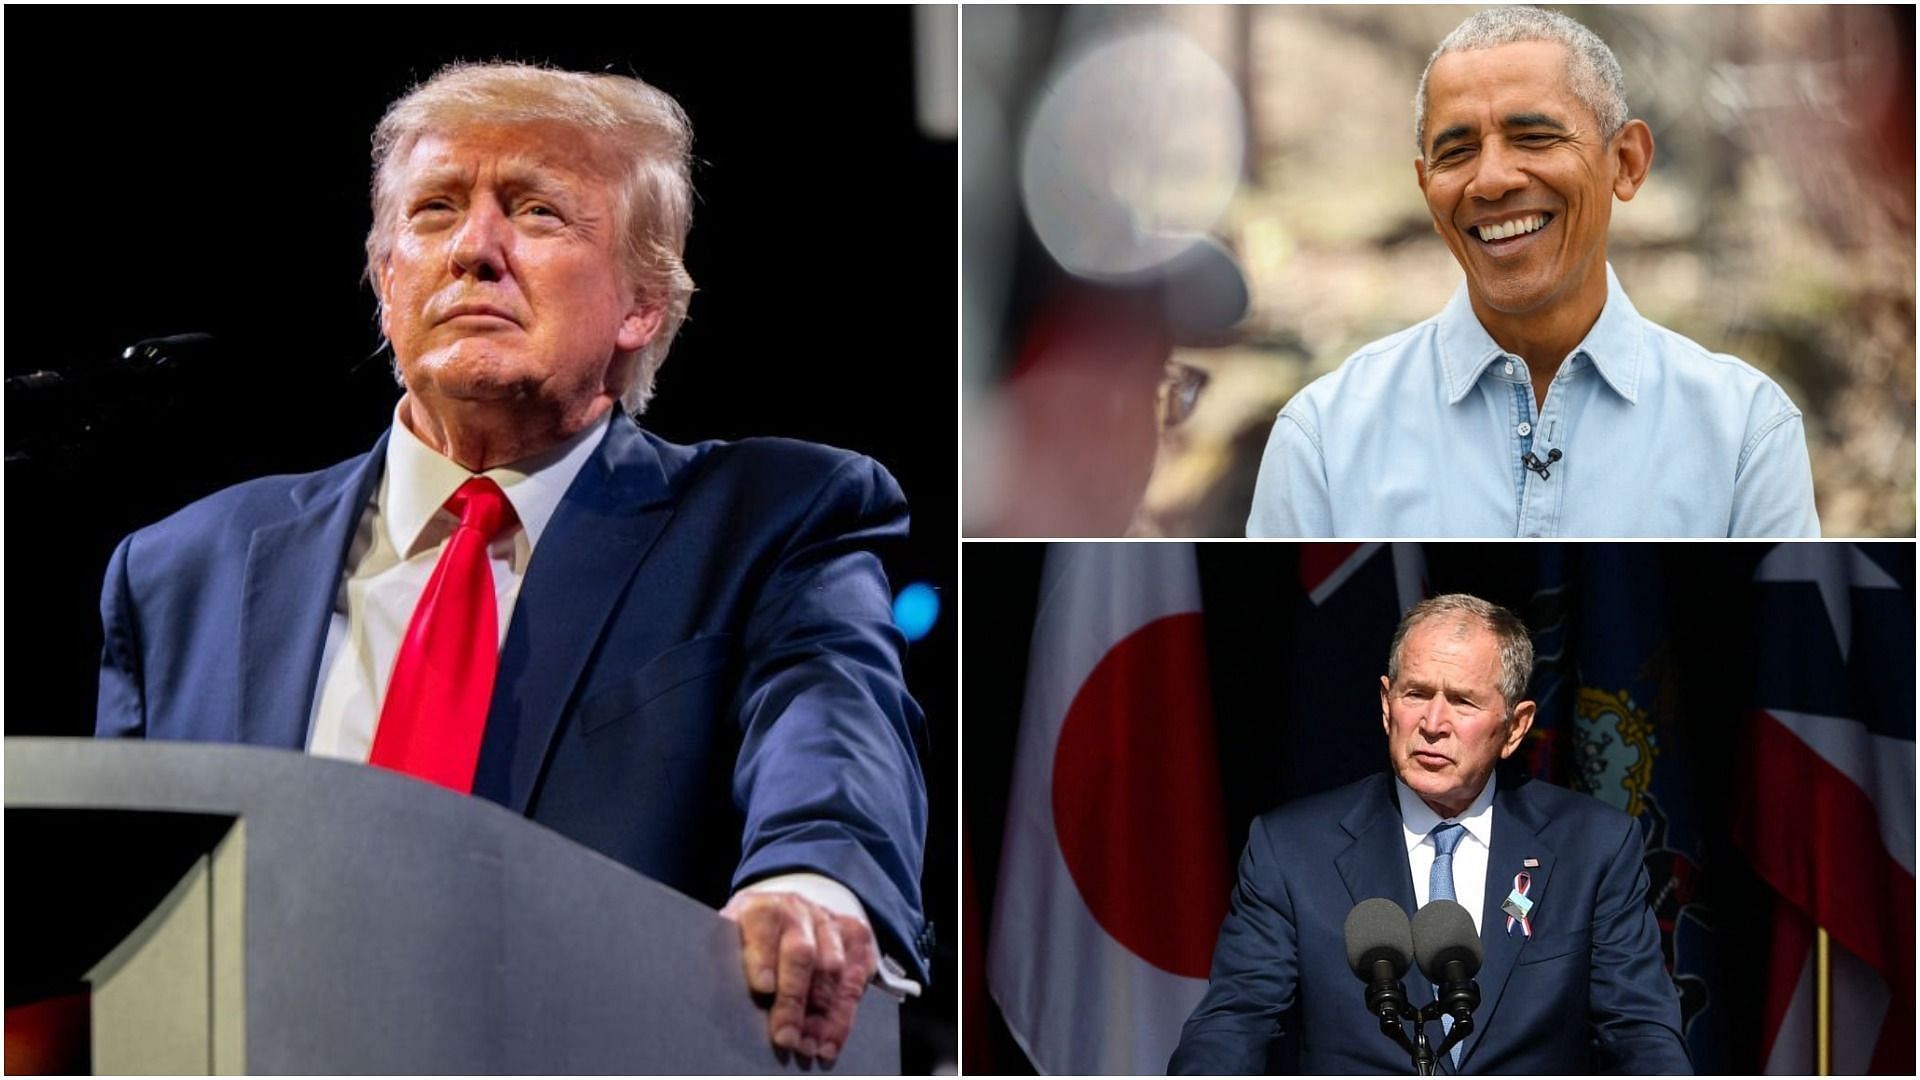 Donald Trump, Barack Obama, and George W. Bush&#039;s names were missing from the list (Images via Brandon Bell, Nathan Congleton, and Mandel Ngan/Getty Images)